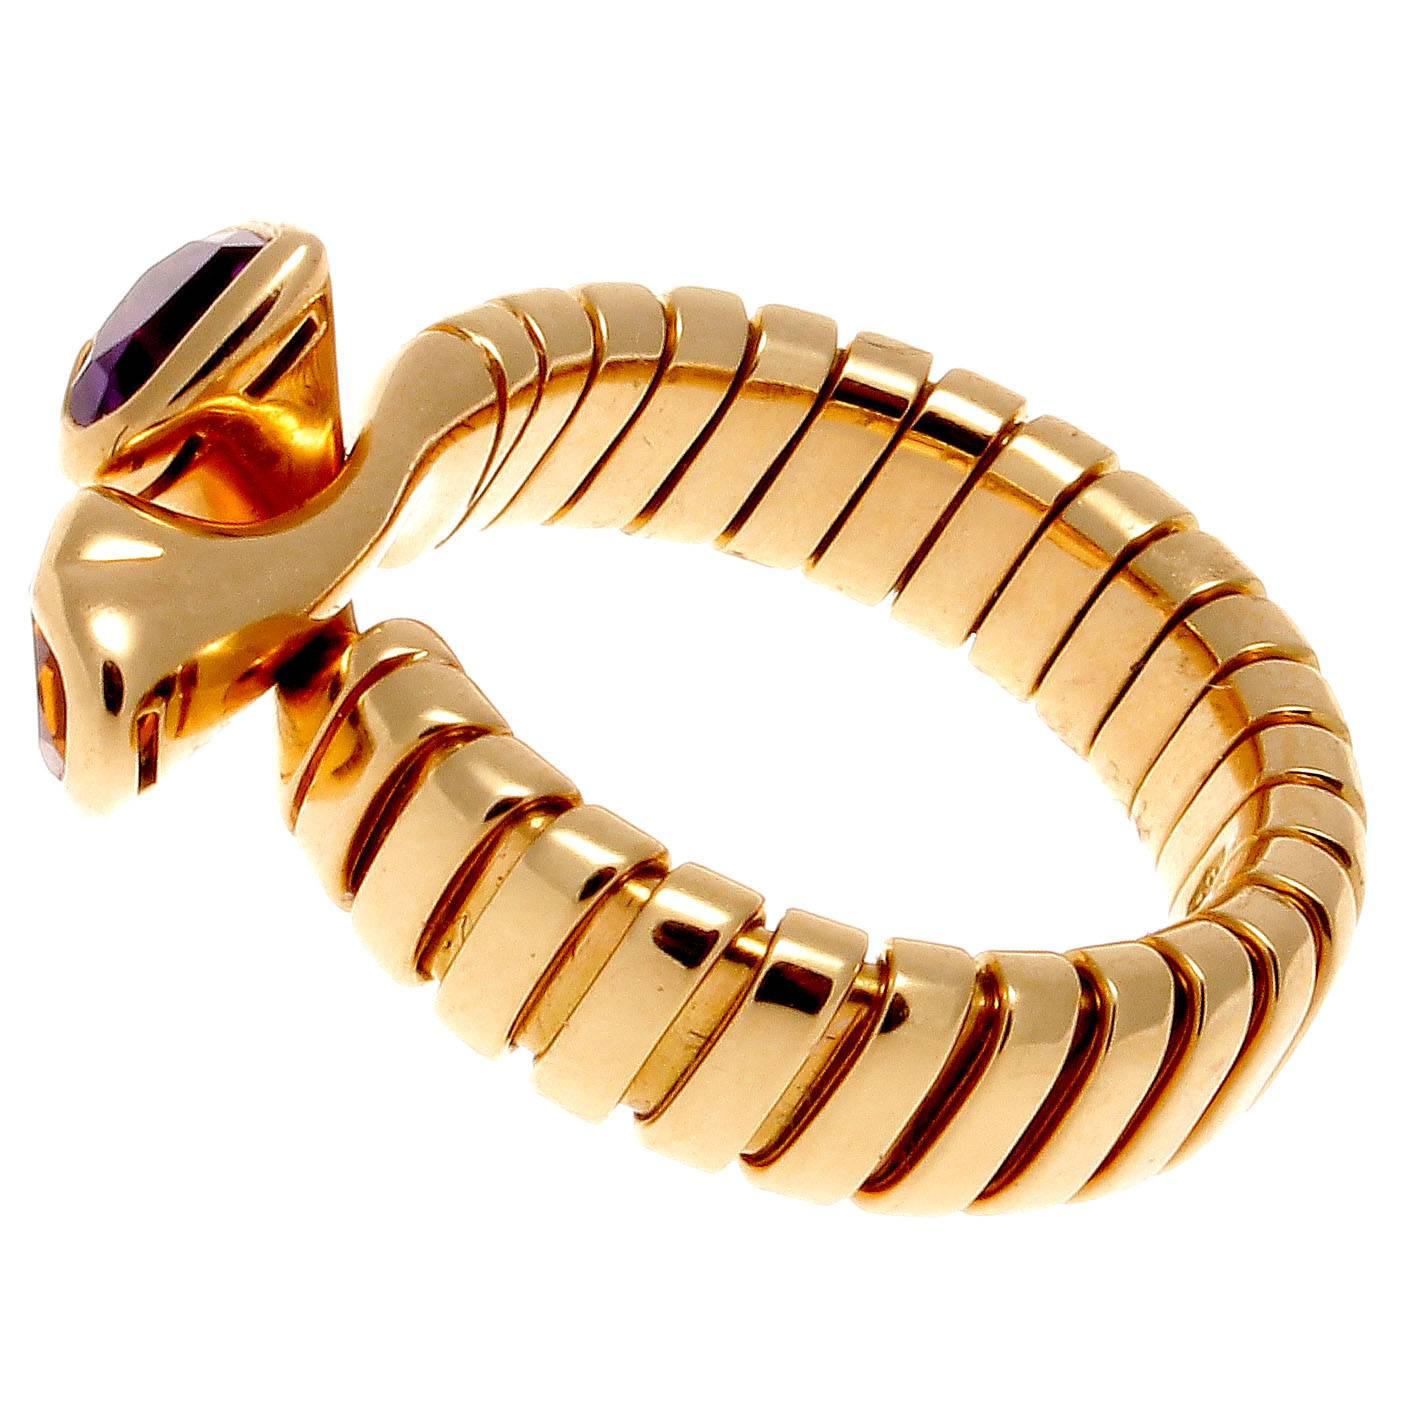 Stylish and colorful from Bulgari. Designed with interlocking hearts of purple amethyst and golden citrine set amid ribbed sections of 18k gold. Signed Bvlgari. 

Ring size 6 with flexibility to fit bigger sizes.